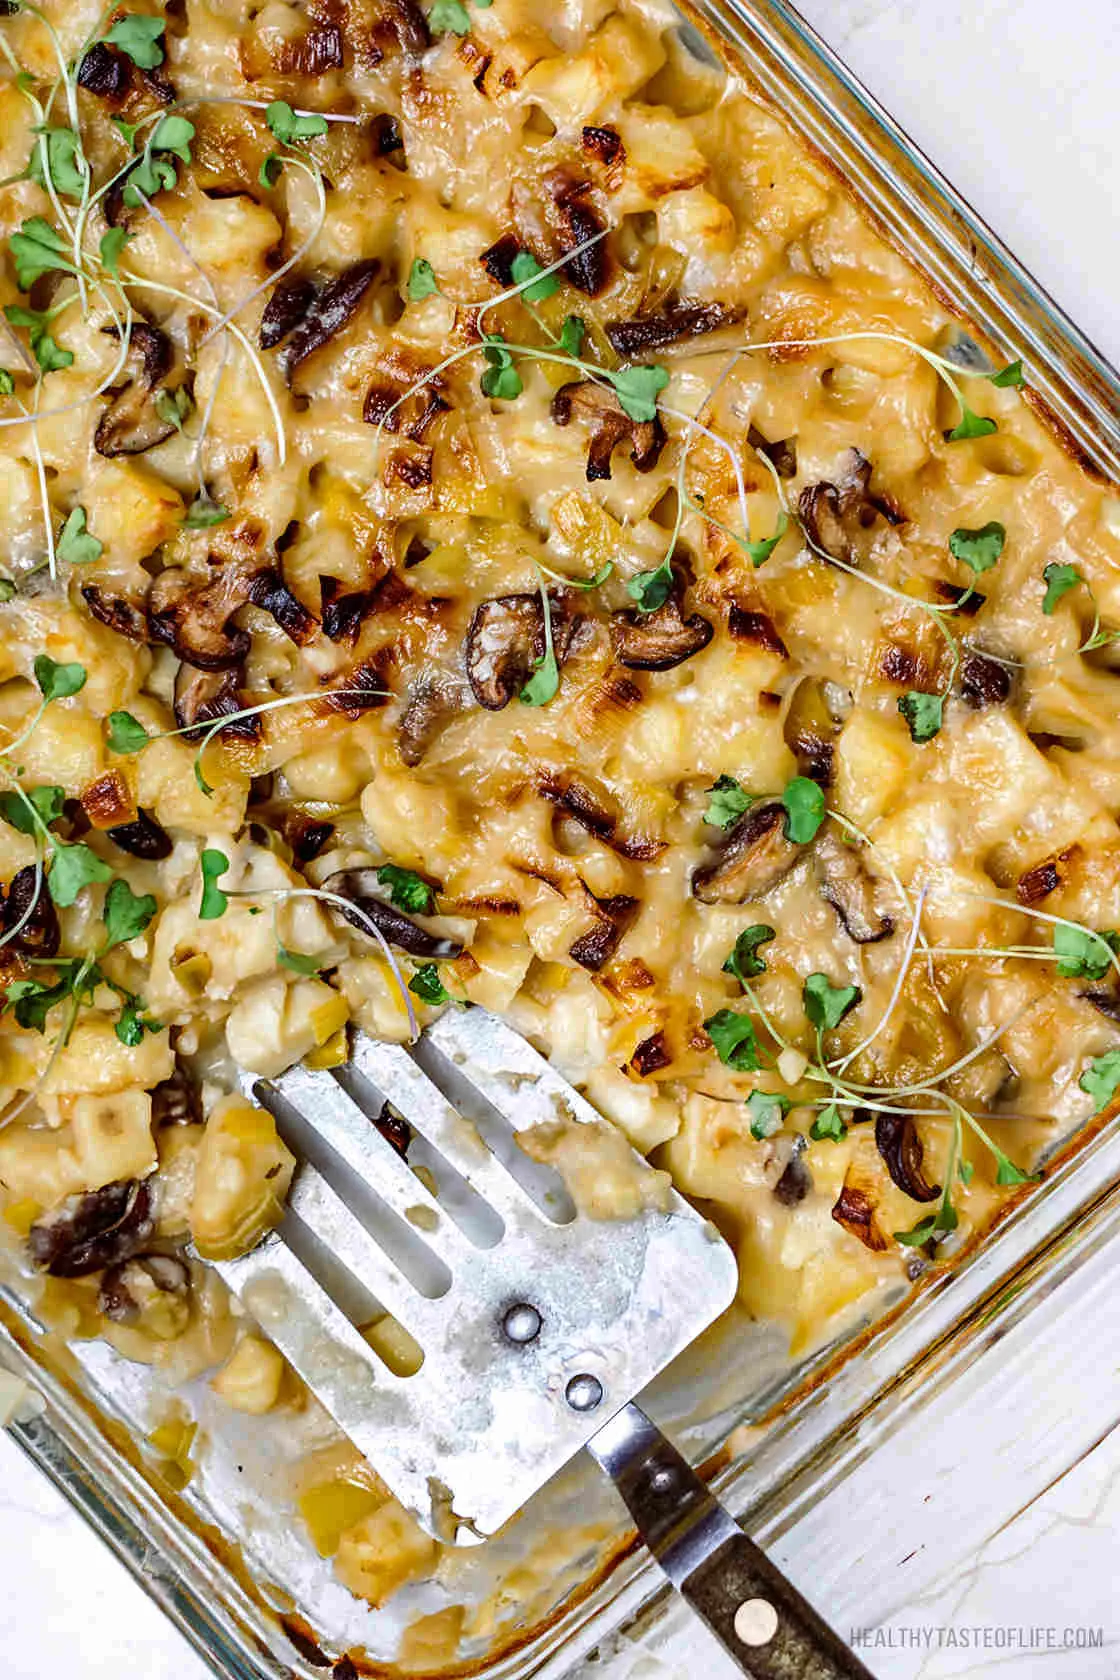 Vegan potato bake or vegan potato casserole made with russet potatoes, mushrooms, a creamy dairy free sauce and vegan feta cheese baked in the oven until golden.